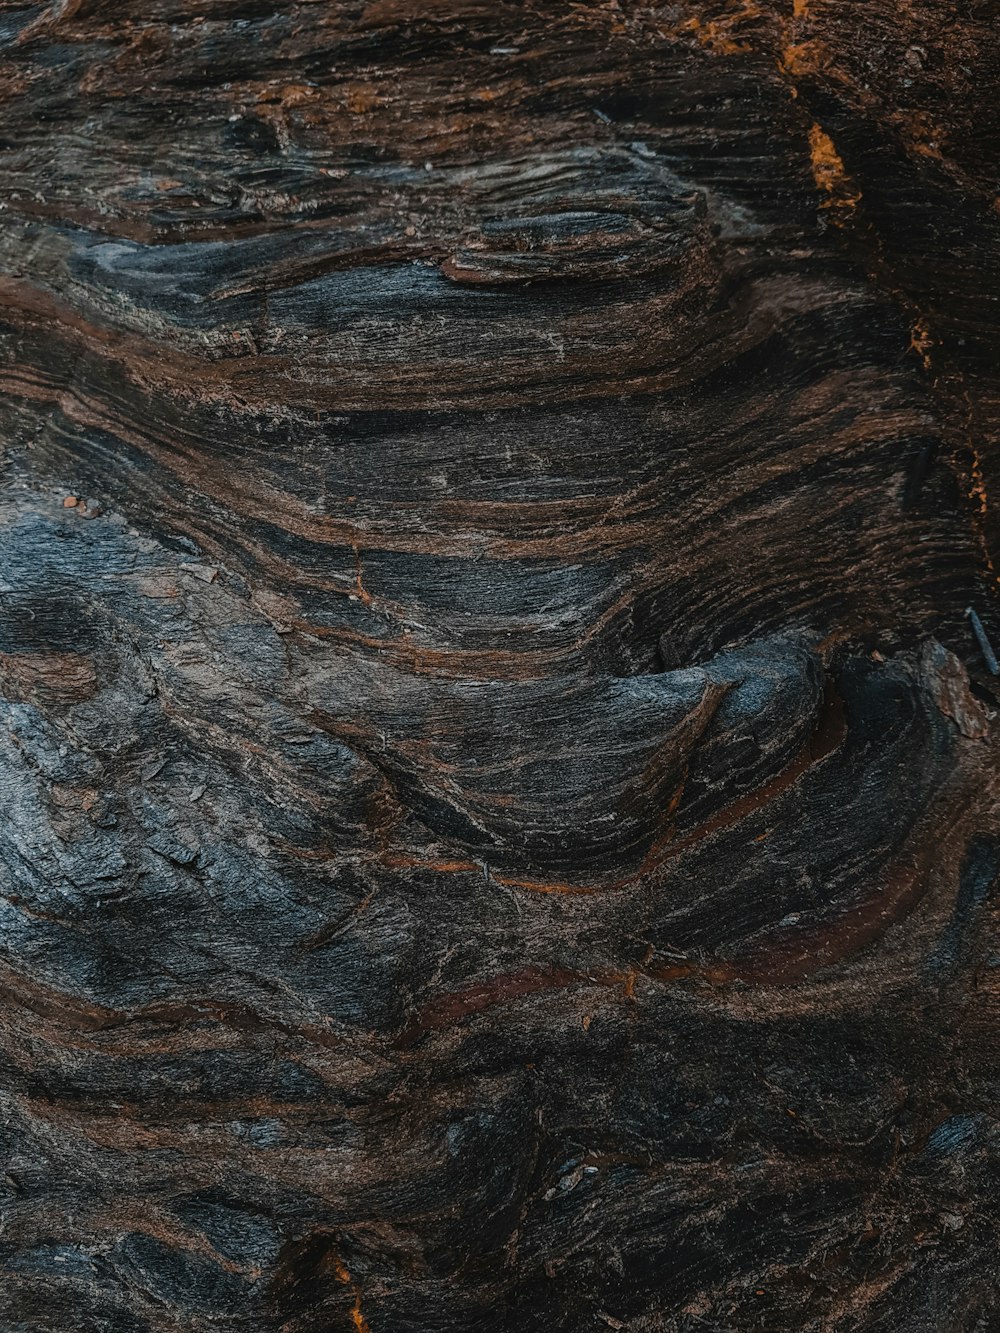 a close up of a rock with a brown and black pattern